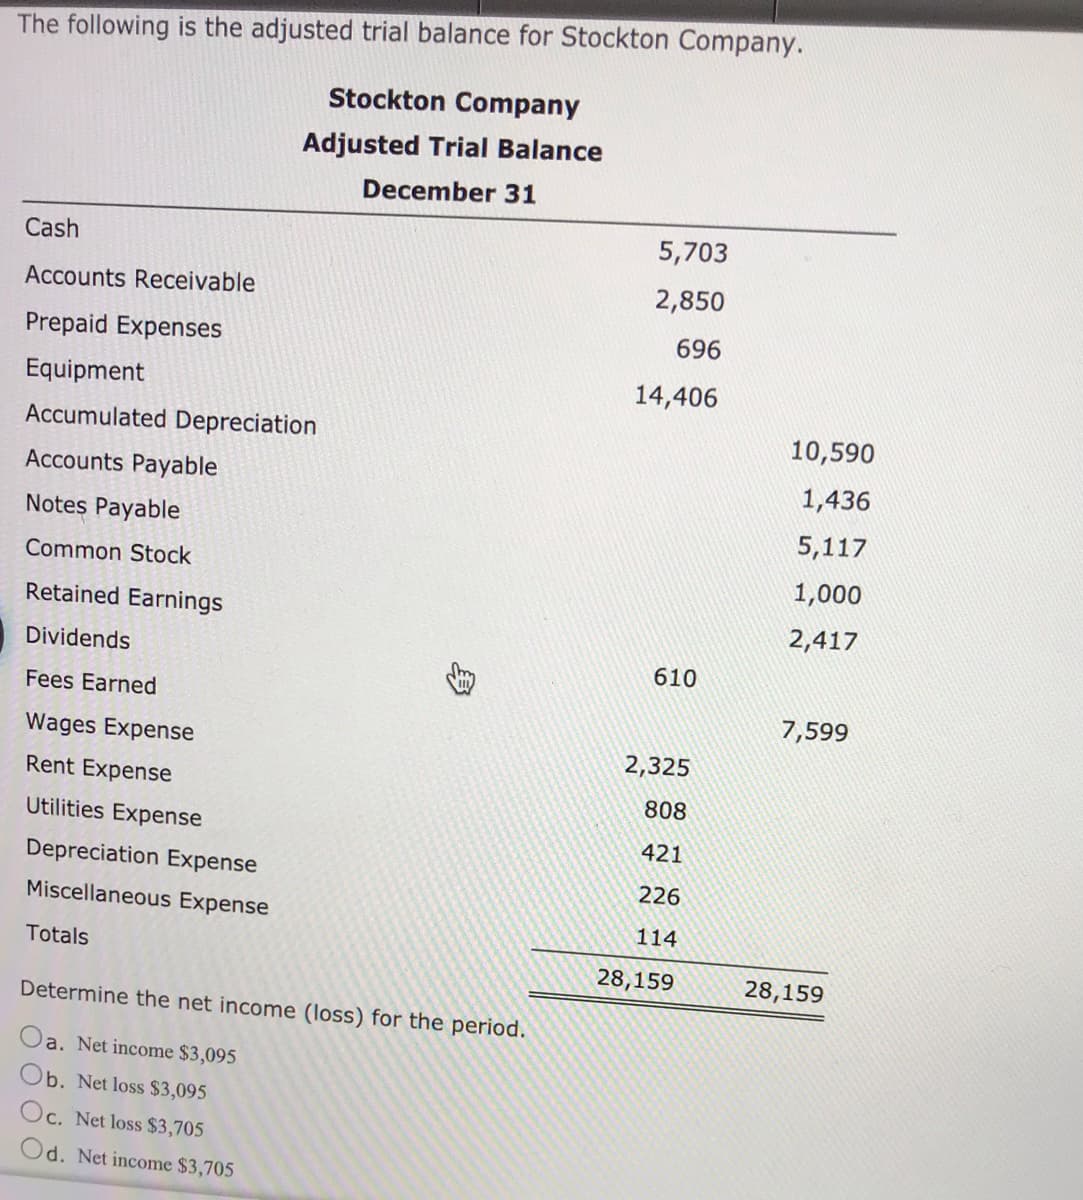 The following is the adjusted trial balance for Stockton Company.
Stockton Company
Adjusted Trial Balance
December 31
Cash
5,703
Accounts Receivable
2,850
Prepaid Expenses
696
Equipment
14,406
Accumulated Depreciation
10,590
Accounts Payable
1,436
Notes Payable
5,117
Common Stock
1,000
Retained Earnings
2,417
Dividends
610
Fees Earned
7,599
Wages Expense
2,325
Rent Expense
808
Utilities Expense
421
Depreciation Expense
226
Miscellaneous Expense
114
Totals
28,159
28,159
Determine the net income (loss) for the period.
Oa. Net income $3,095
Ob. Net loss $3,095
Oc. Net loss $3,705
Od. Net income $3,705
